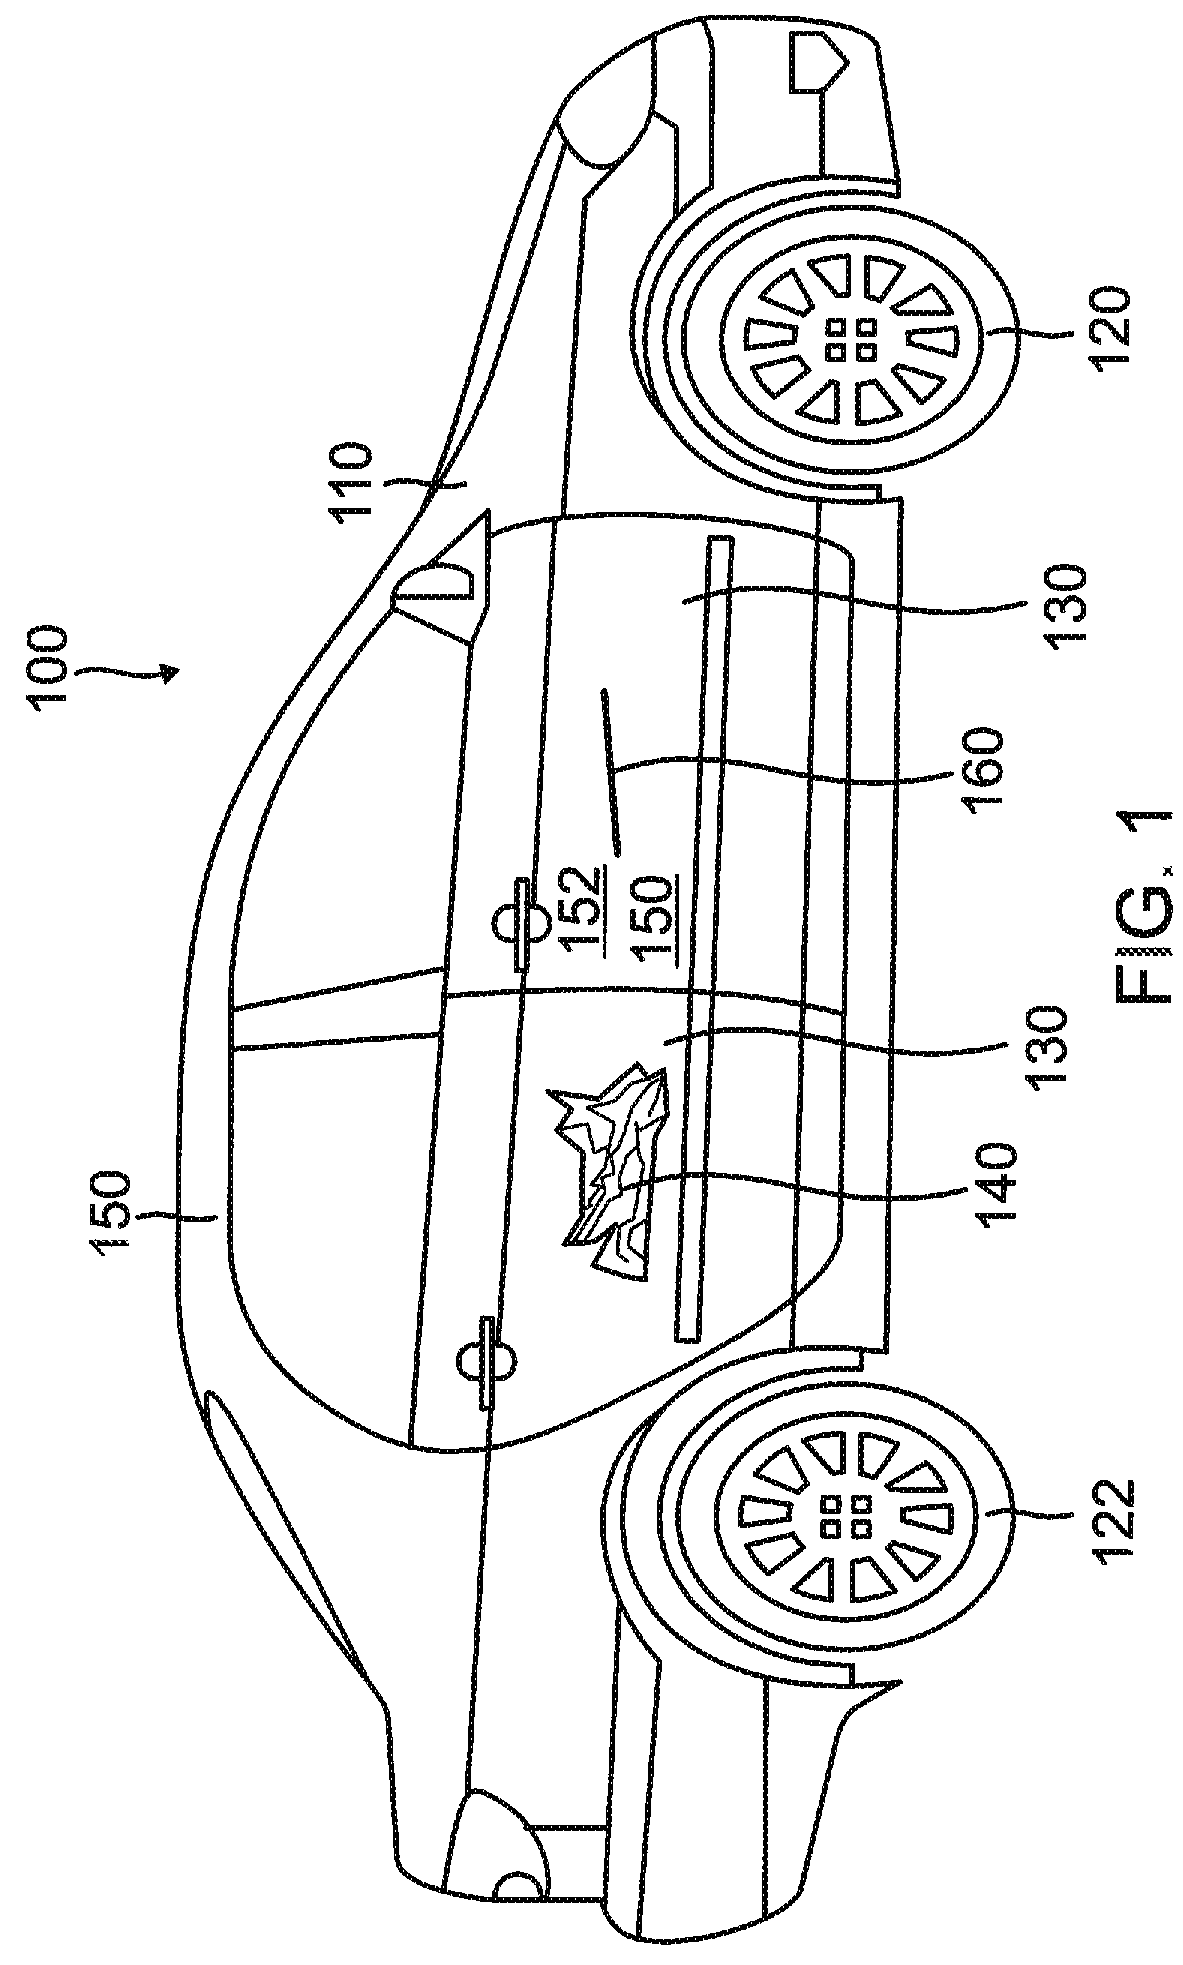 Apparatus and method to conceal damage on a vehicle